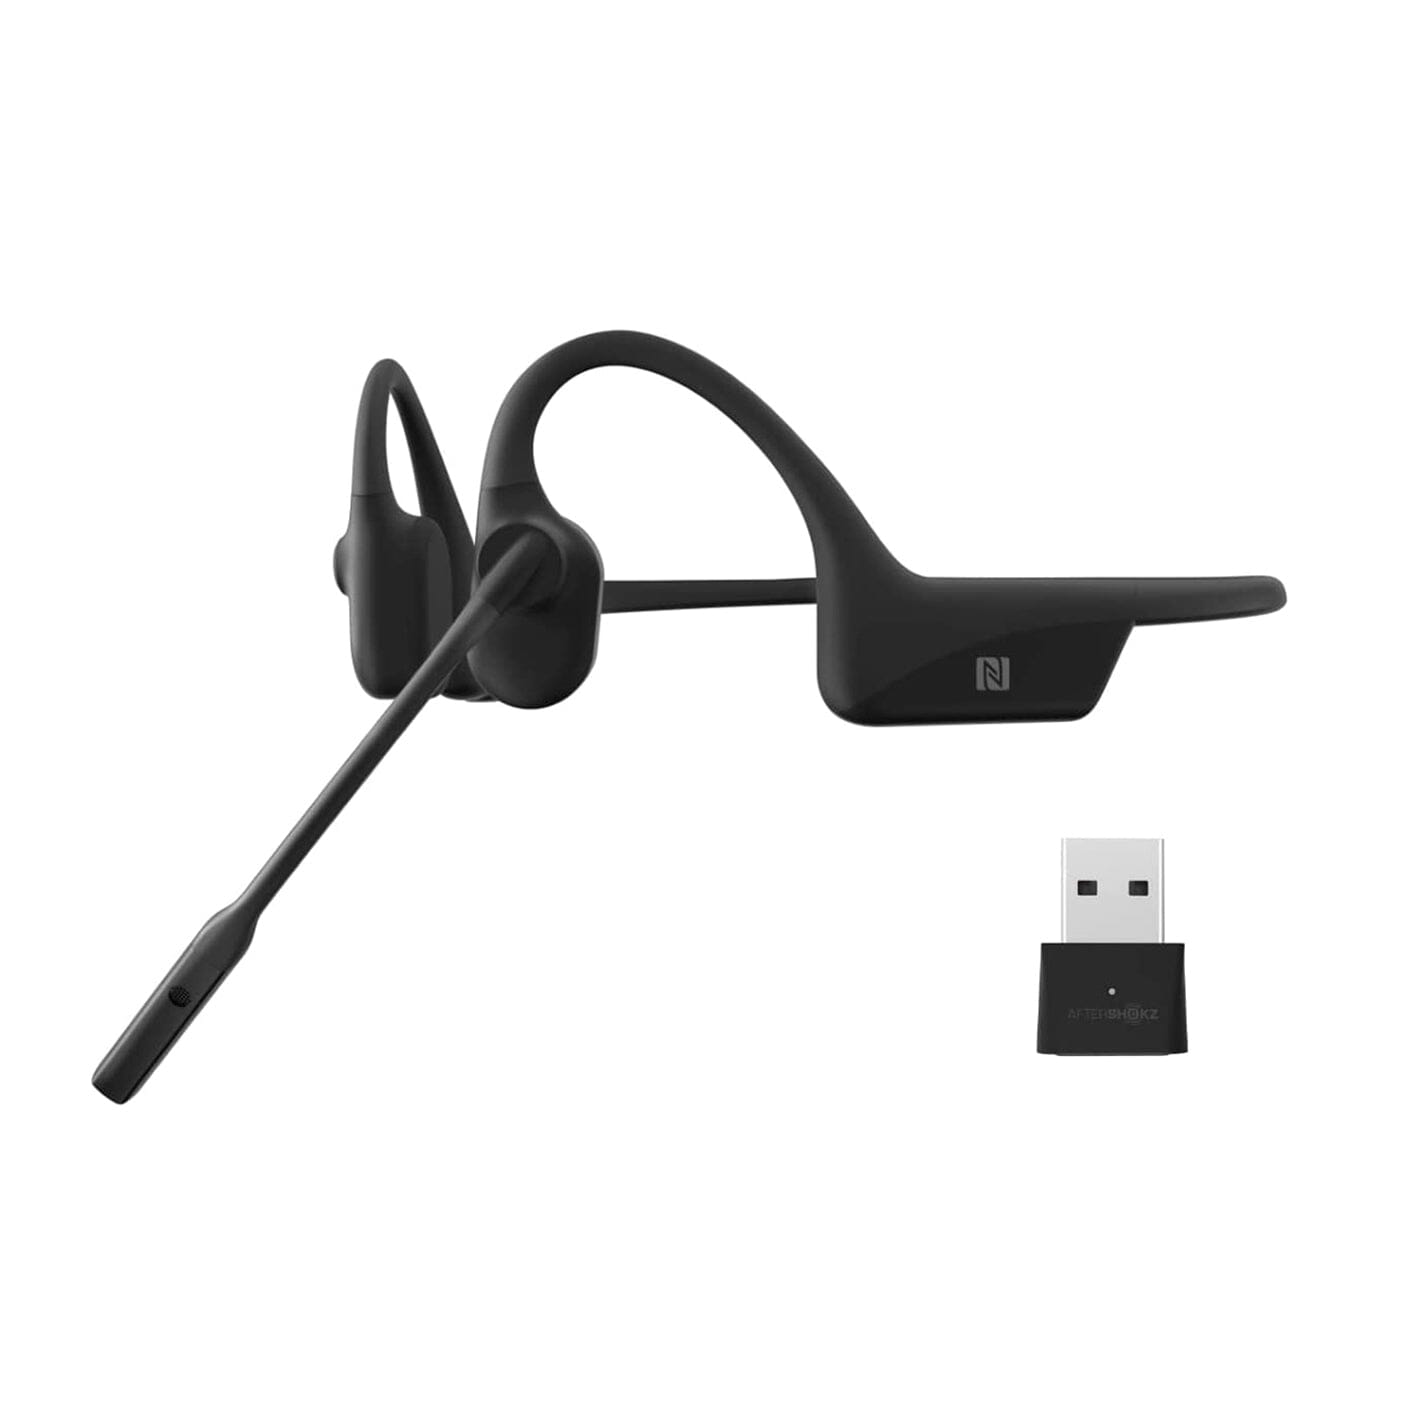 AfterSHOKZ OpenCommUC(Rebranded as SHOKZ OpenComm UC) - Bluetooth Stereo Computer Headset with Loop100 USB-A Adapter-Bone Conduction Wireless PC Headphones for Home Office Business Use, with Bookmark SHOKZ Black 